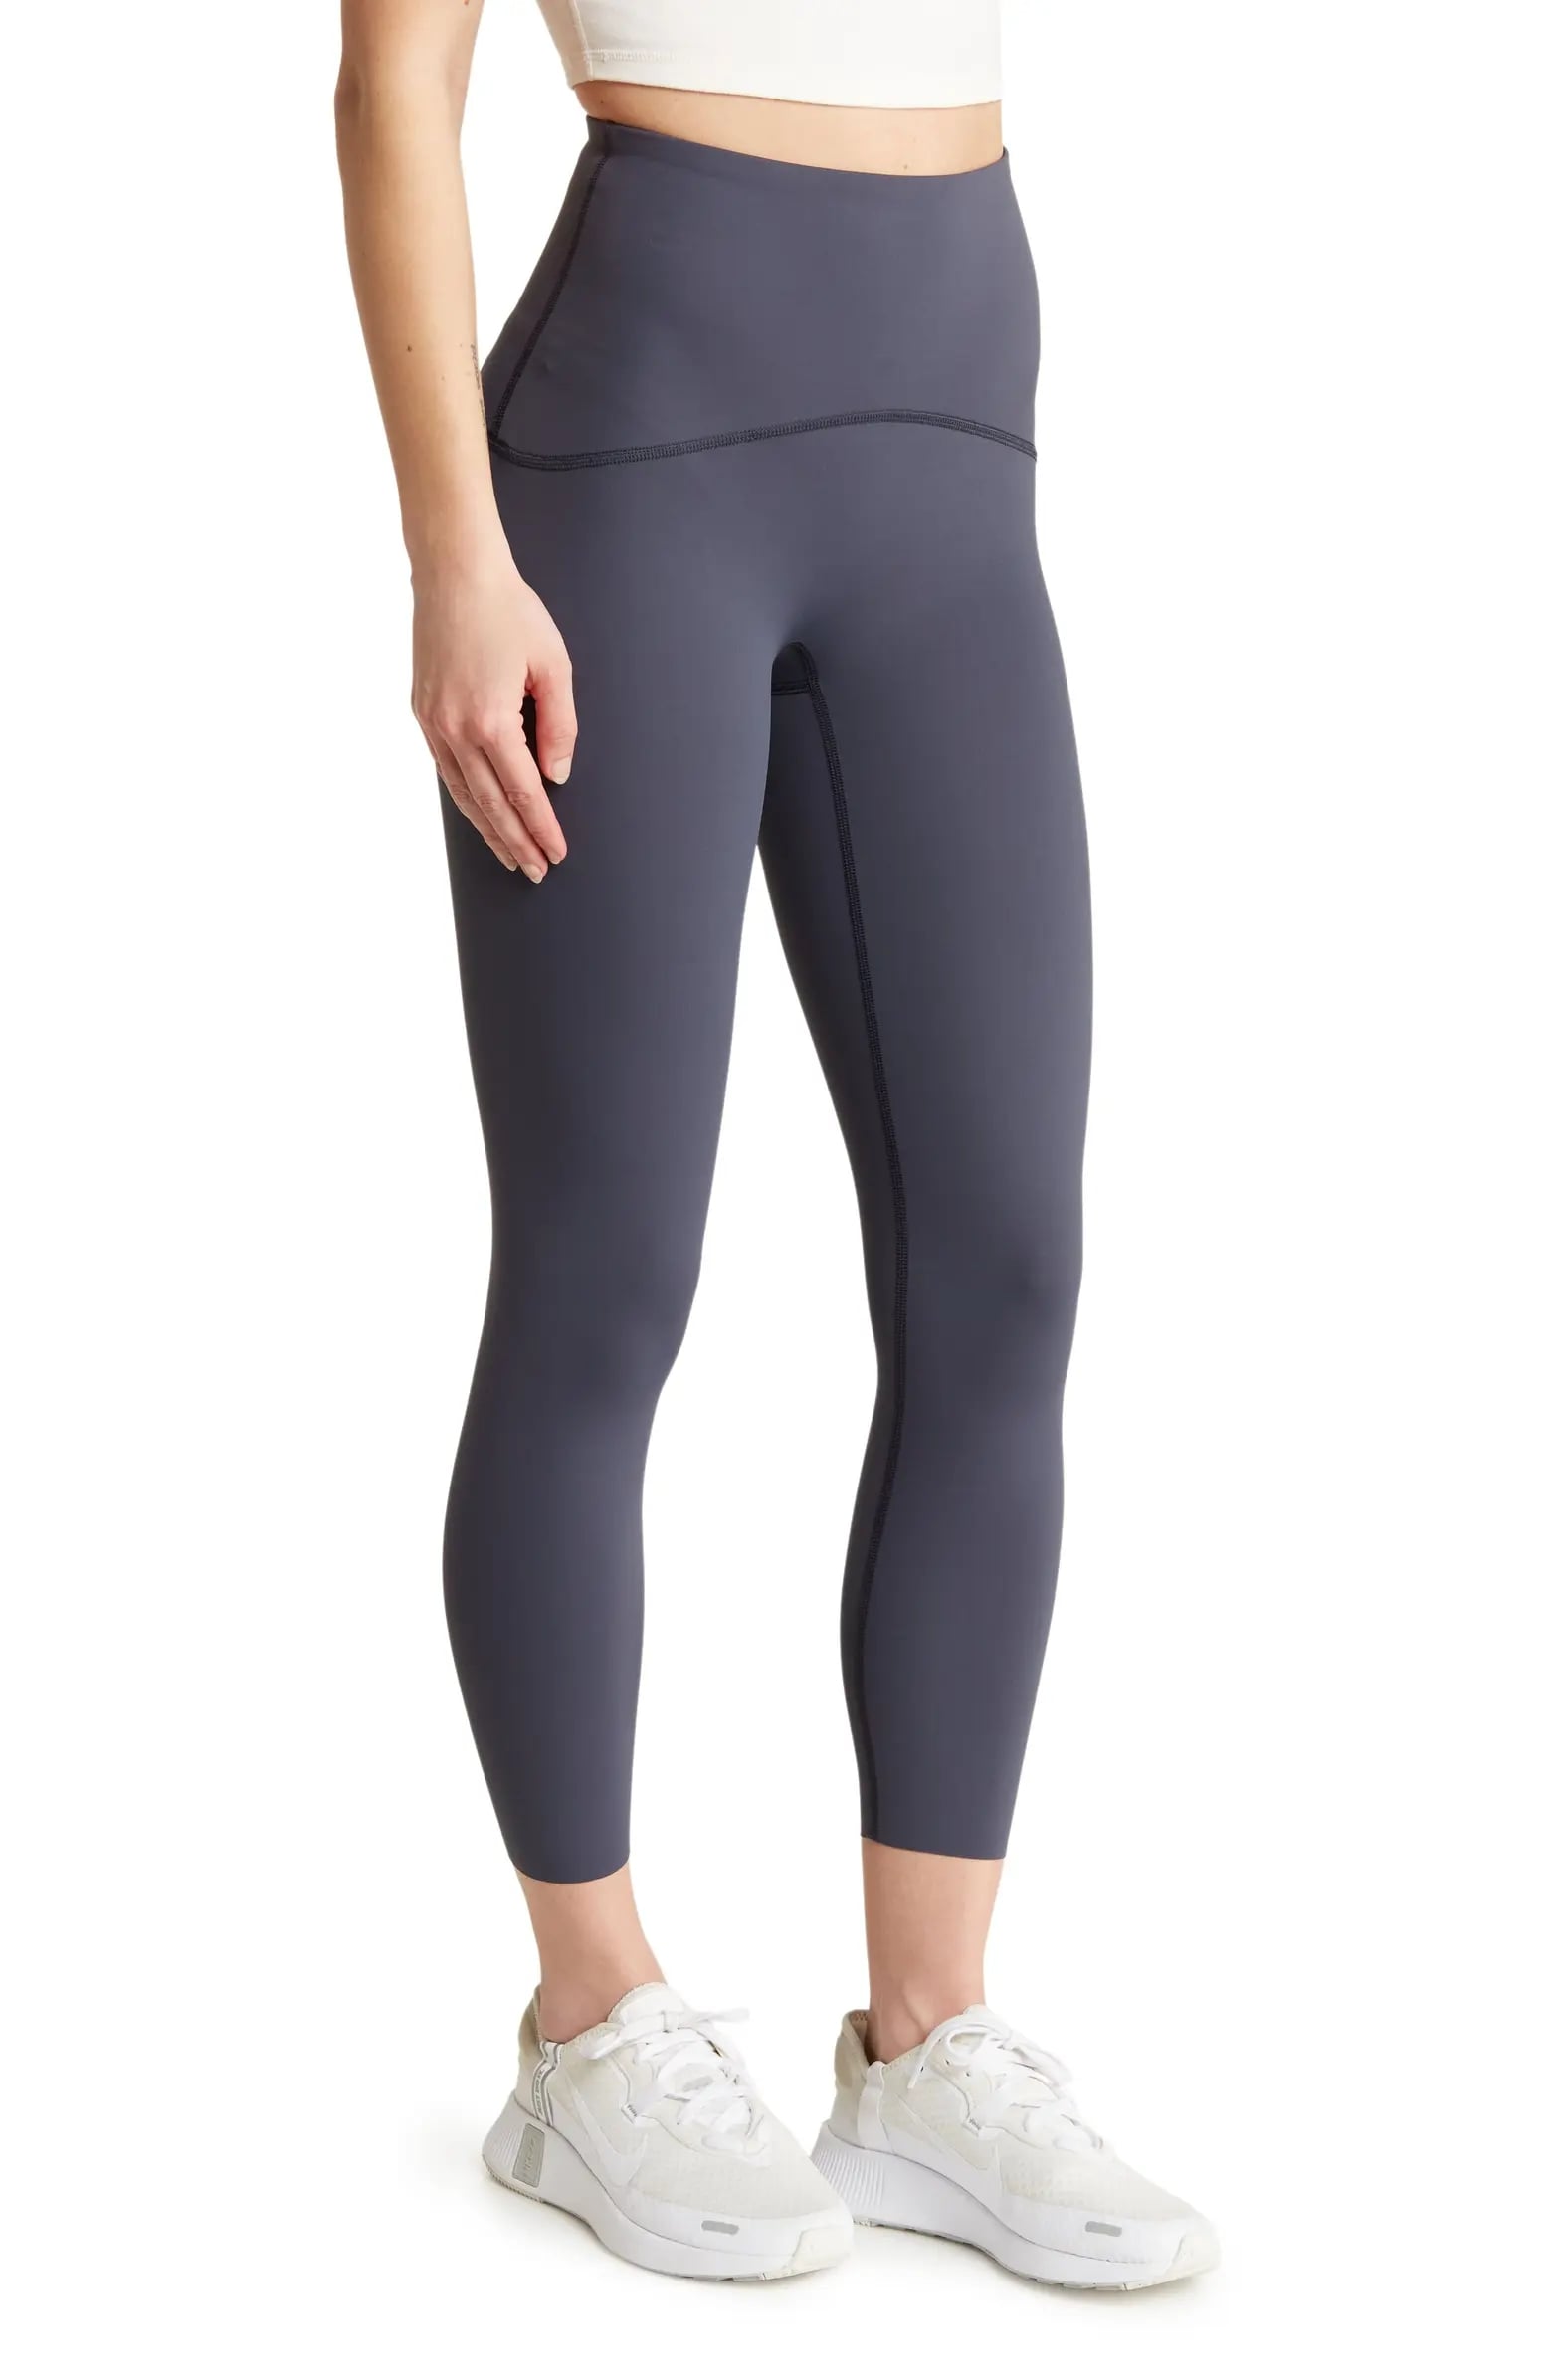 Are Compression Leggings Good for Yoga?– Thermajane